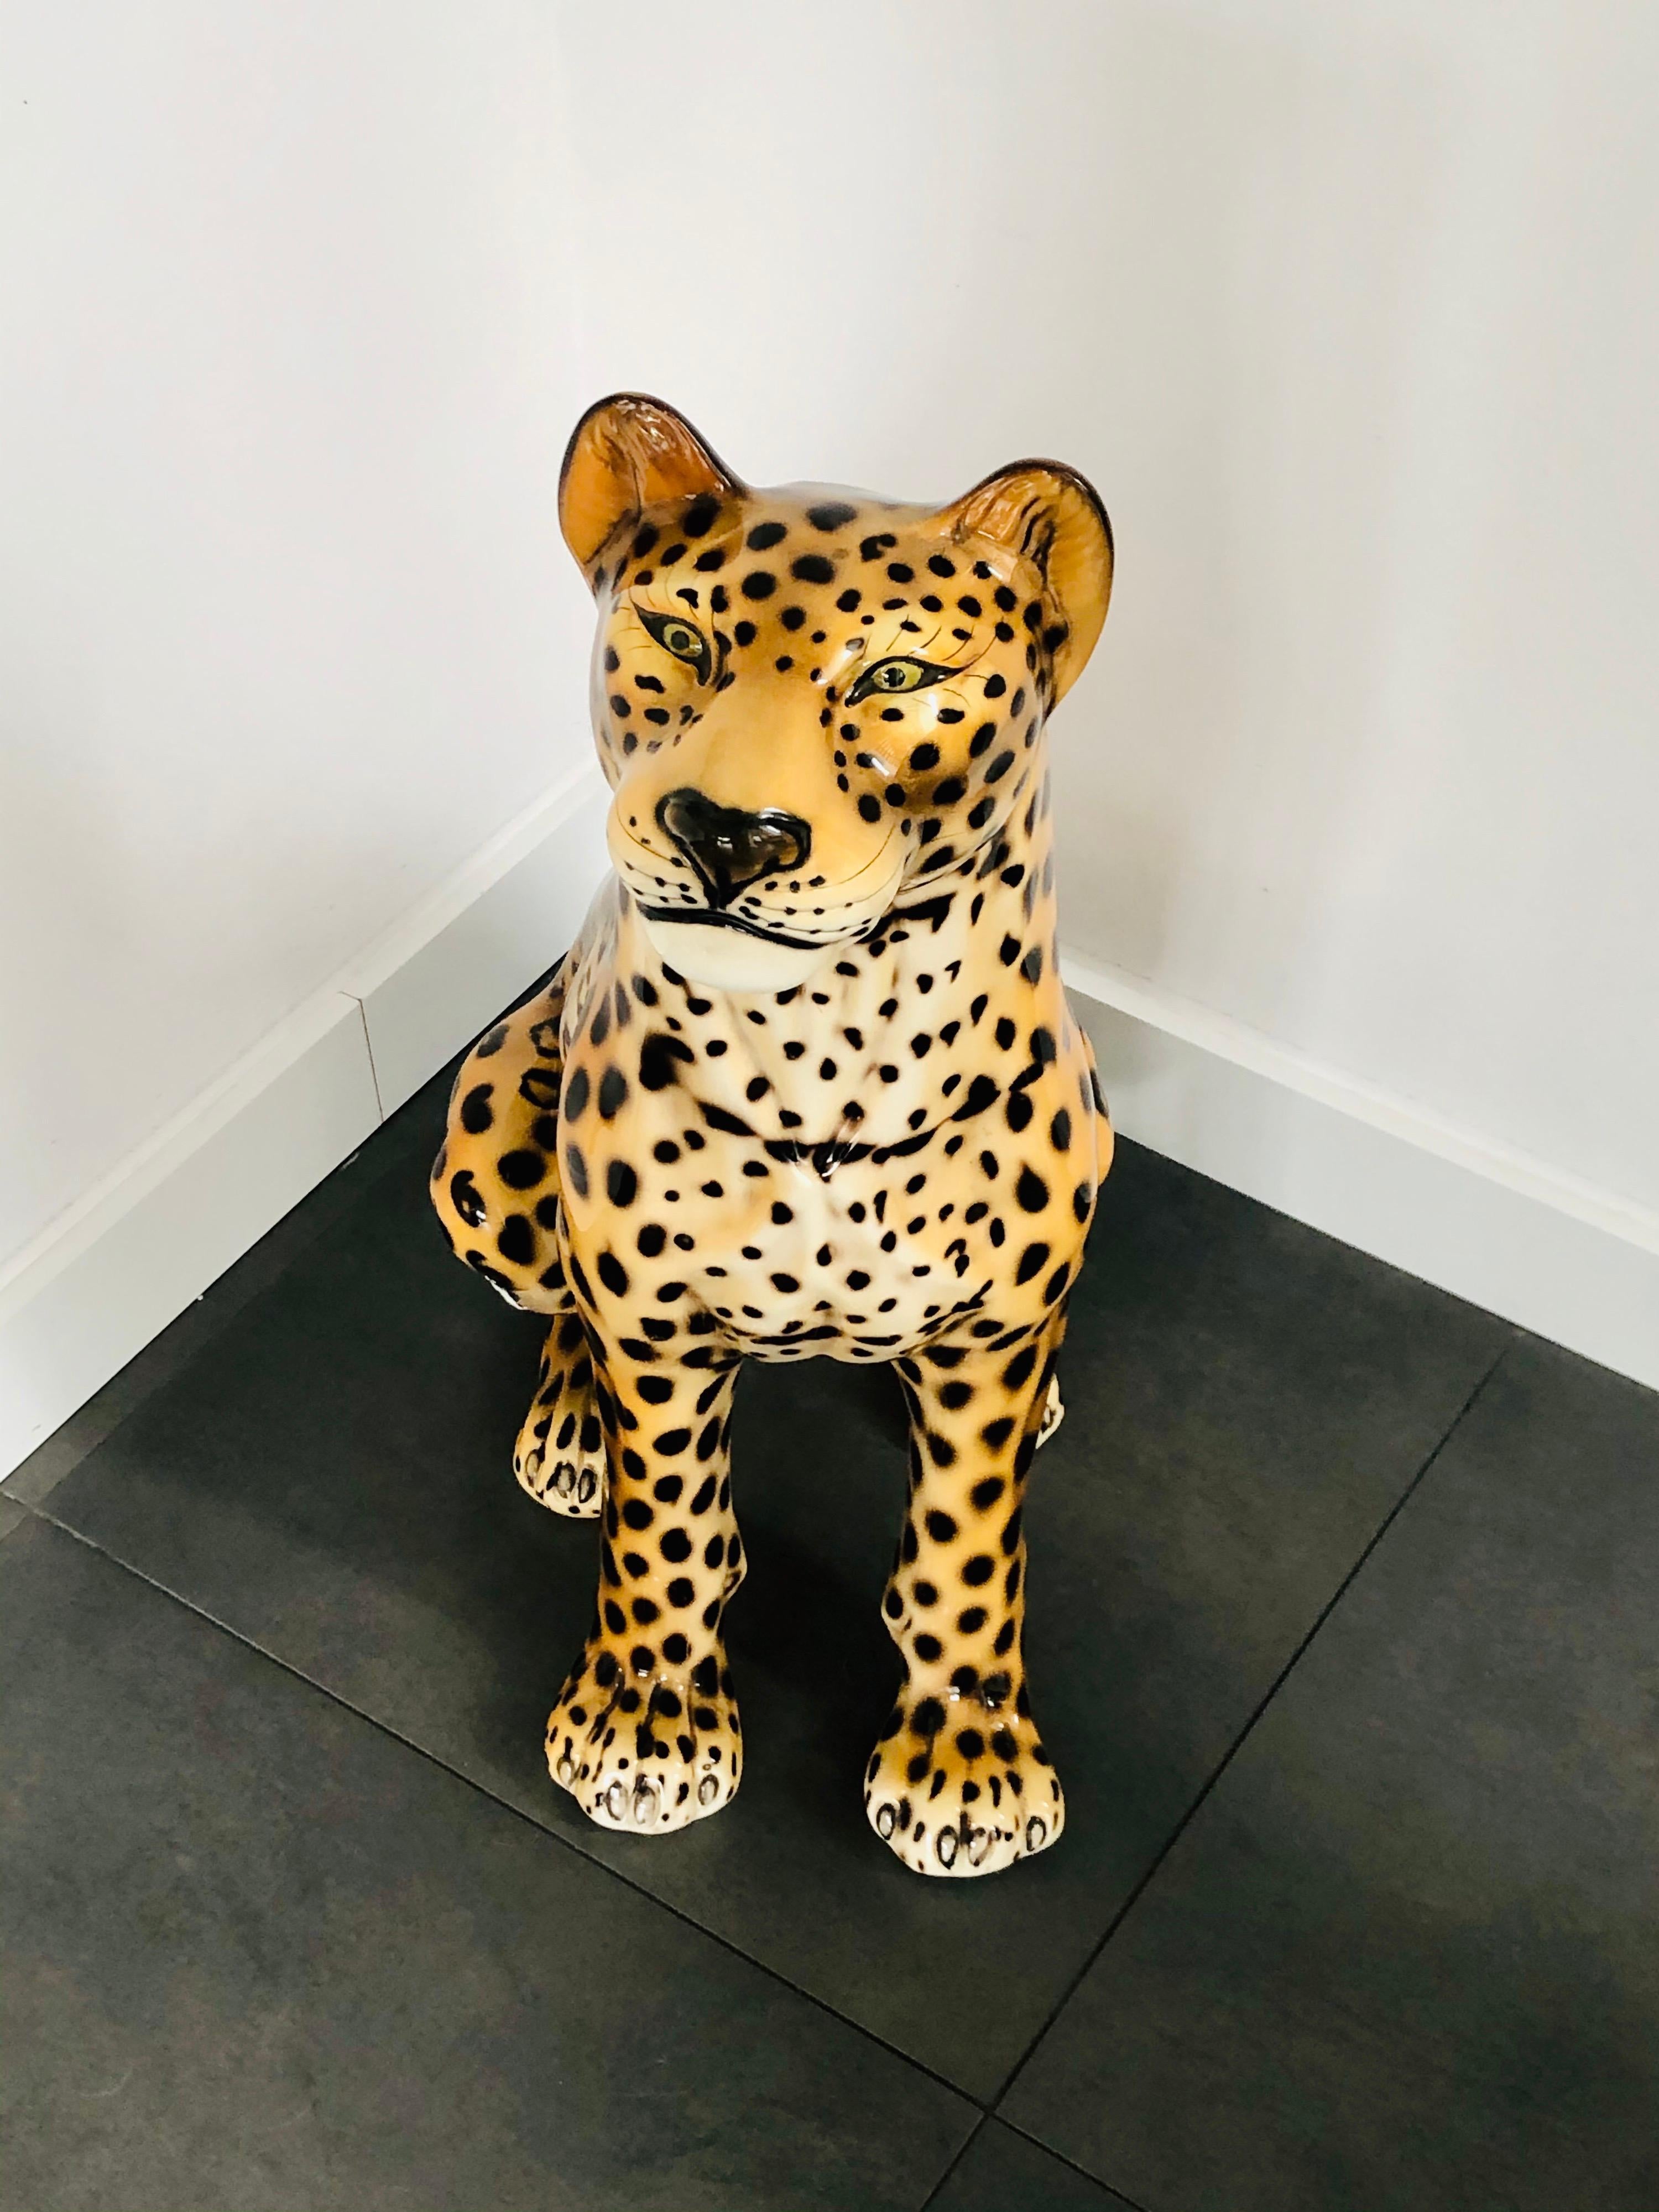 Italian ceramic, signatures, good condition - one problem is a damaged tail - last pictures - that's why the price is lower. Leopard was produced in 1960s in Italy.